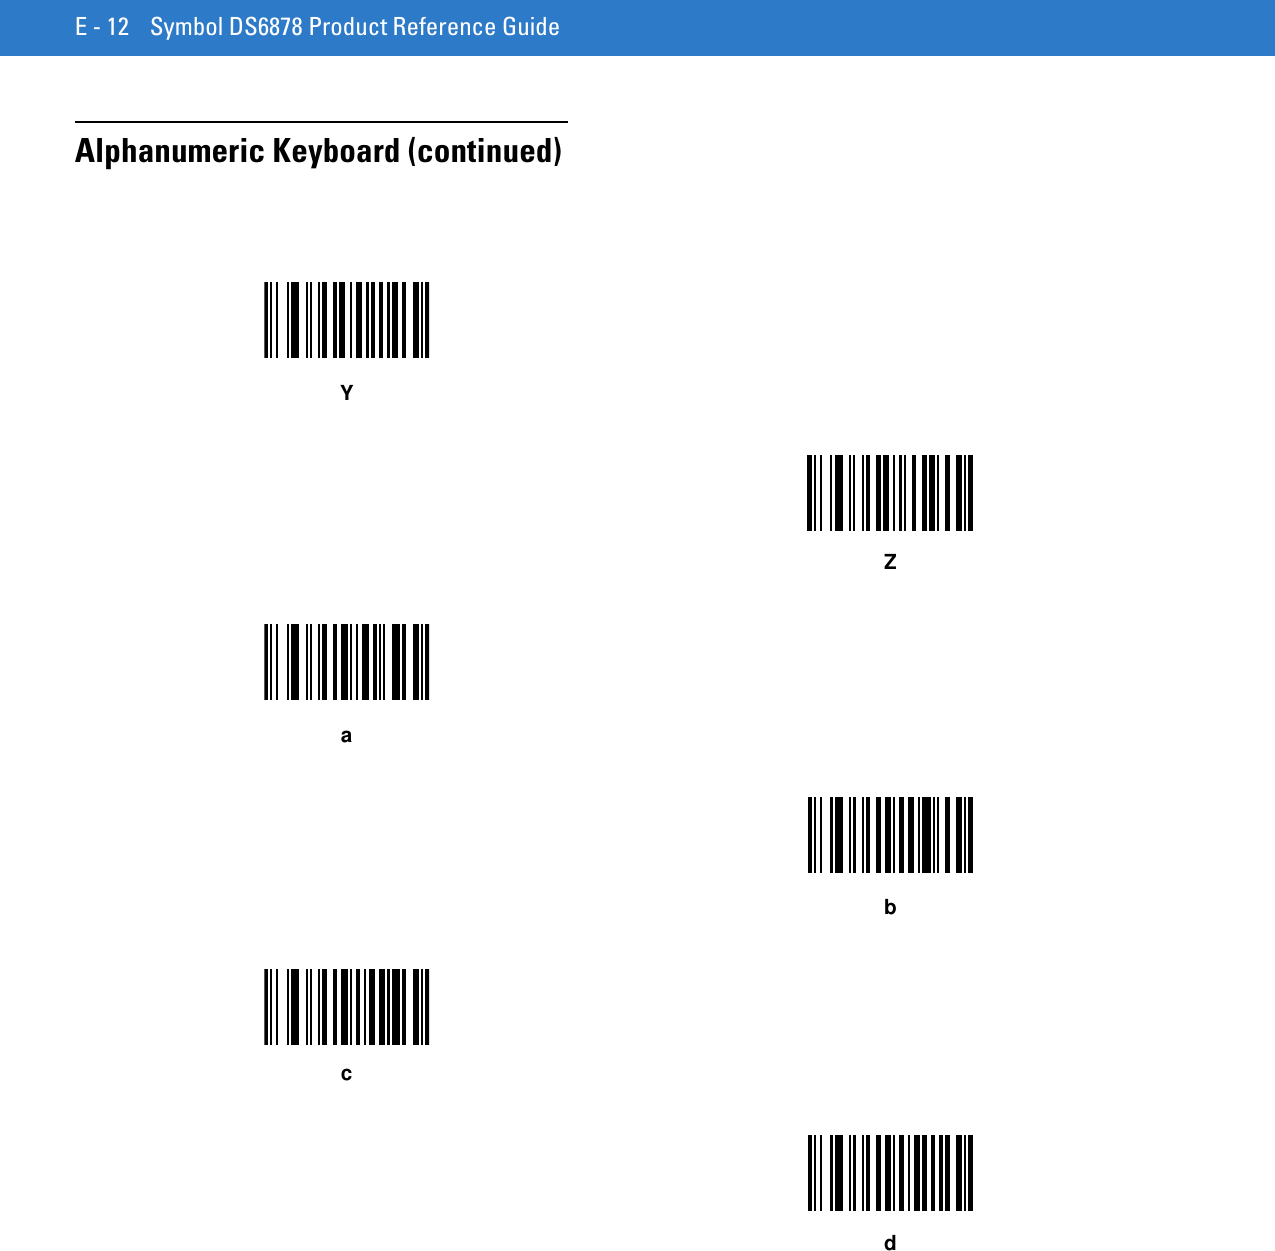 E - 12 Symbol DS6878 Product Reference GuideAlphanumeric Keyboard (continued)YZabcd